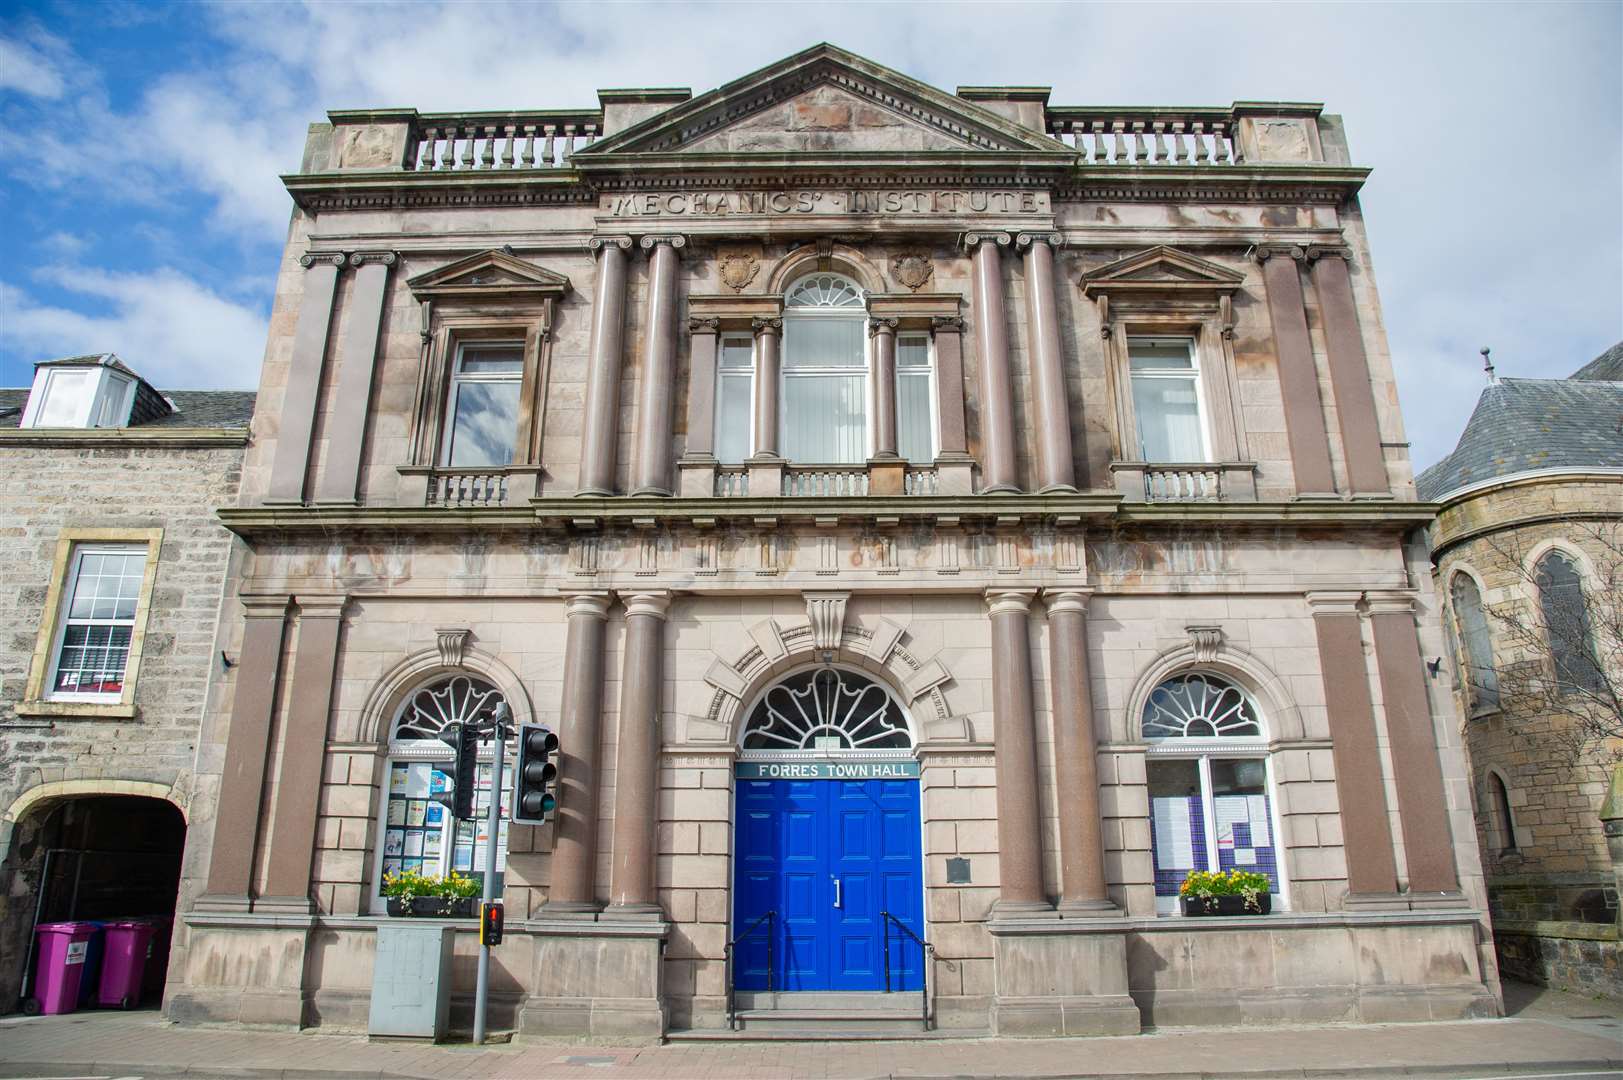 Forres Town Hall will host the event.